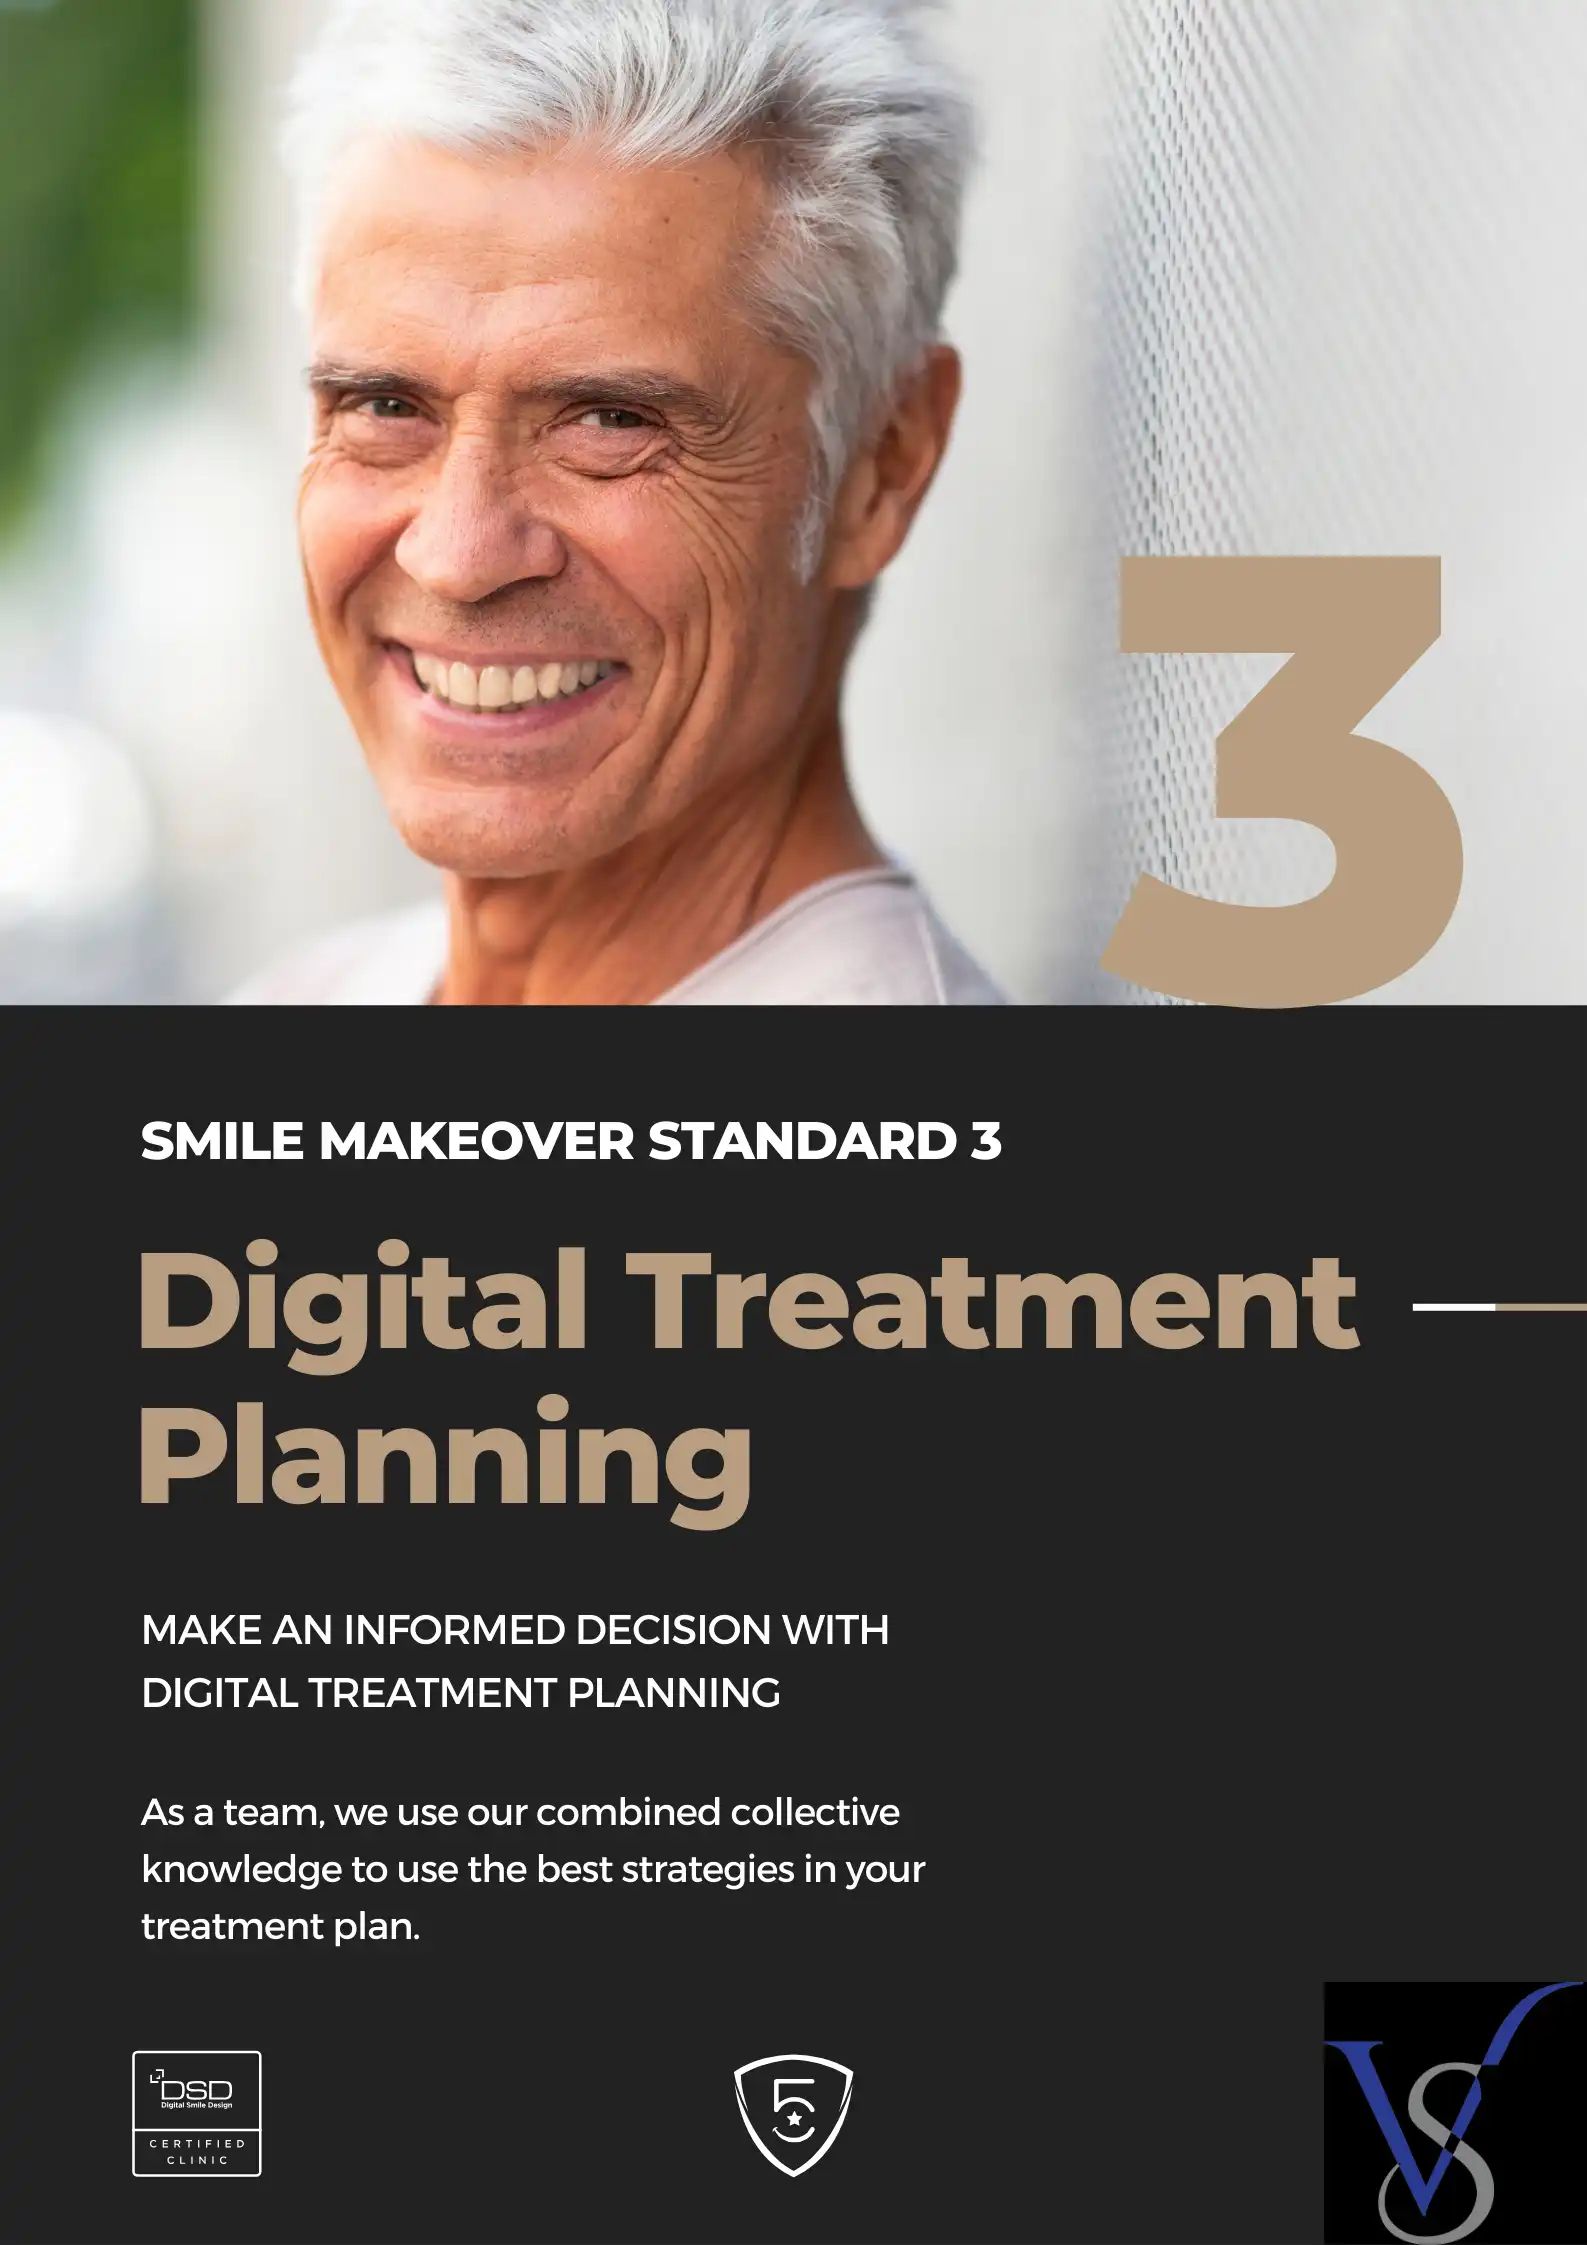 SMILE MAKEOVER STANDARD 3: MAKE AN INFORMED DECISION WITH DIGITAL TREATMENT PLANNING As a team, we use our combined collective knowledge to apply the best strategies in your treatment plan.